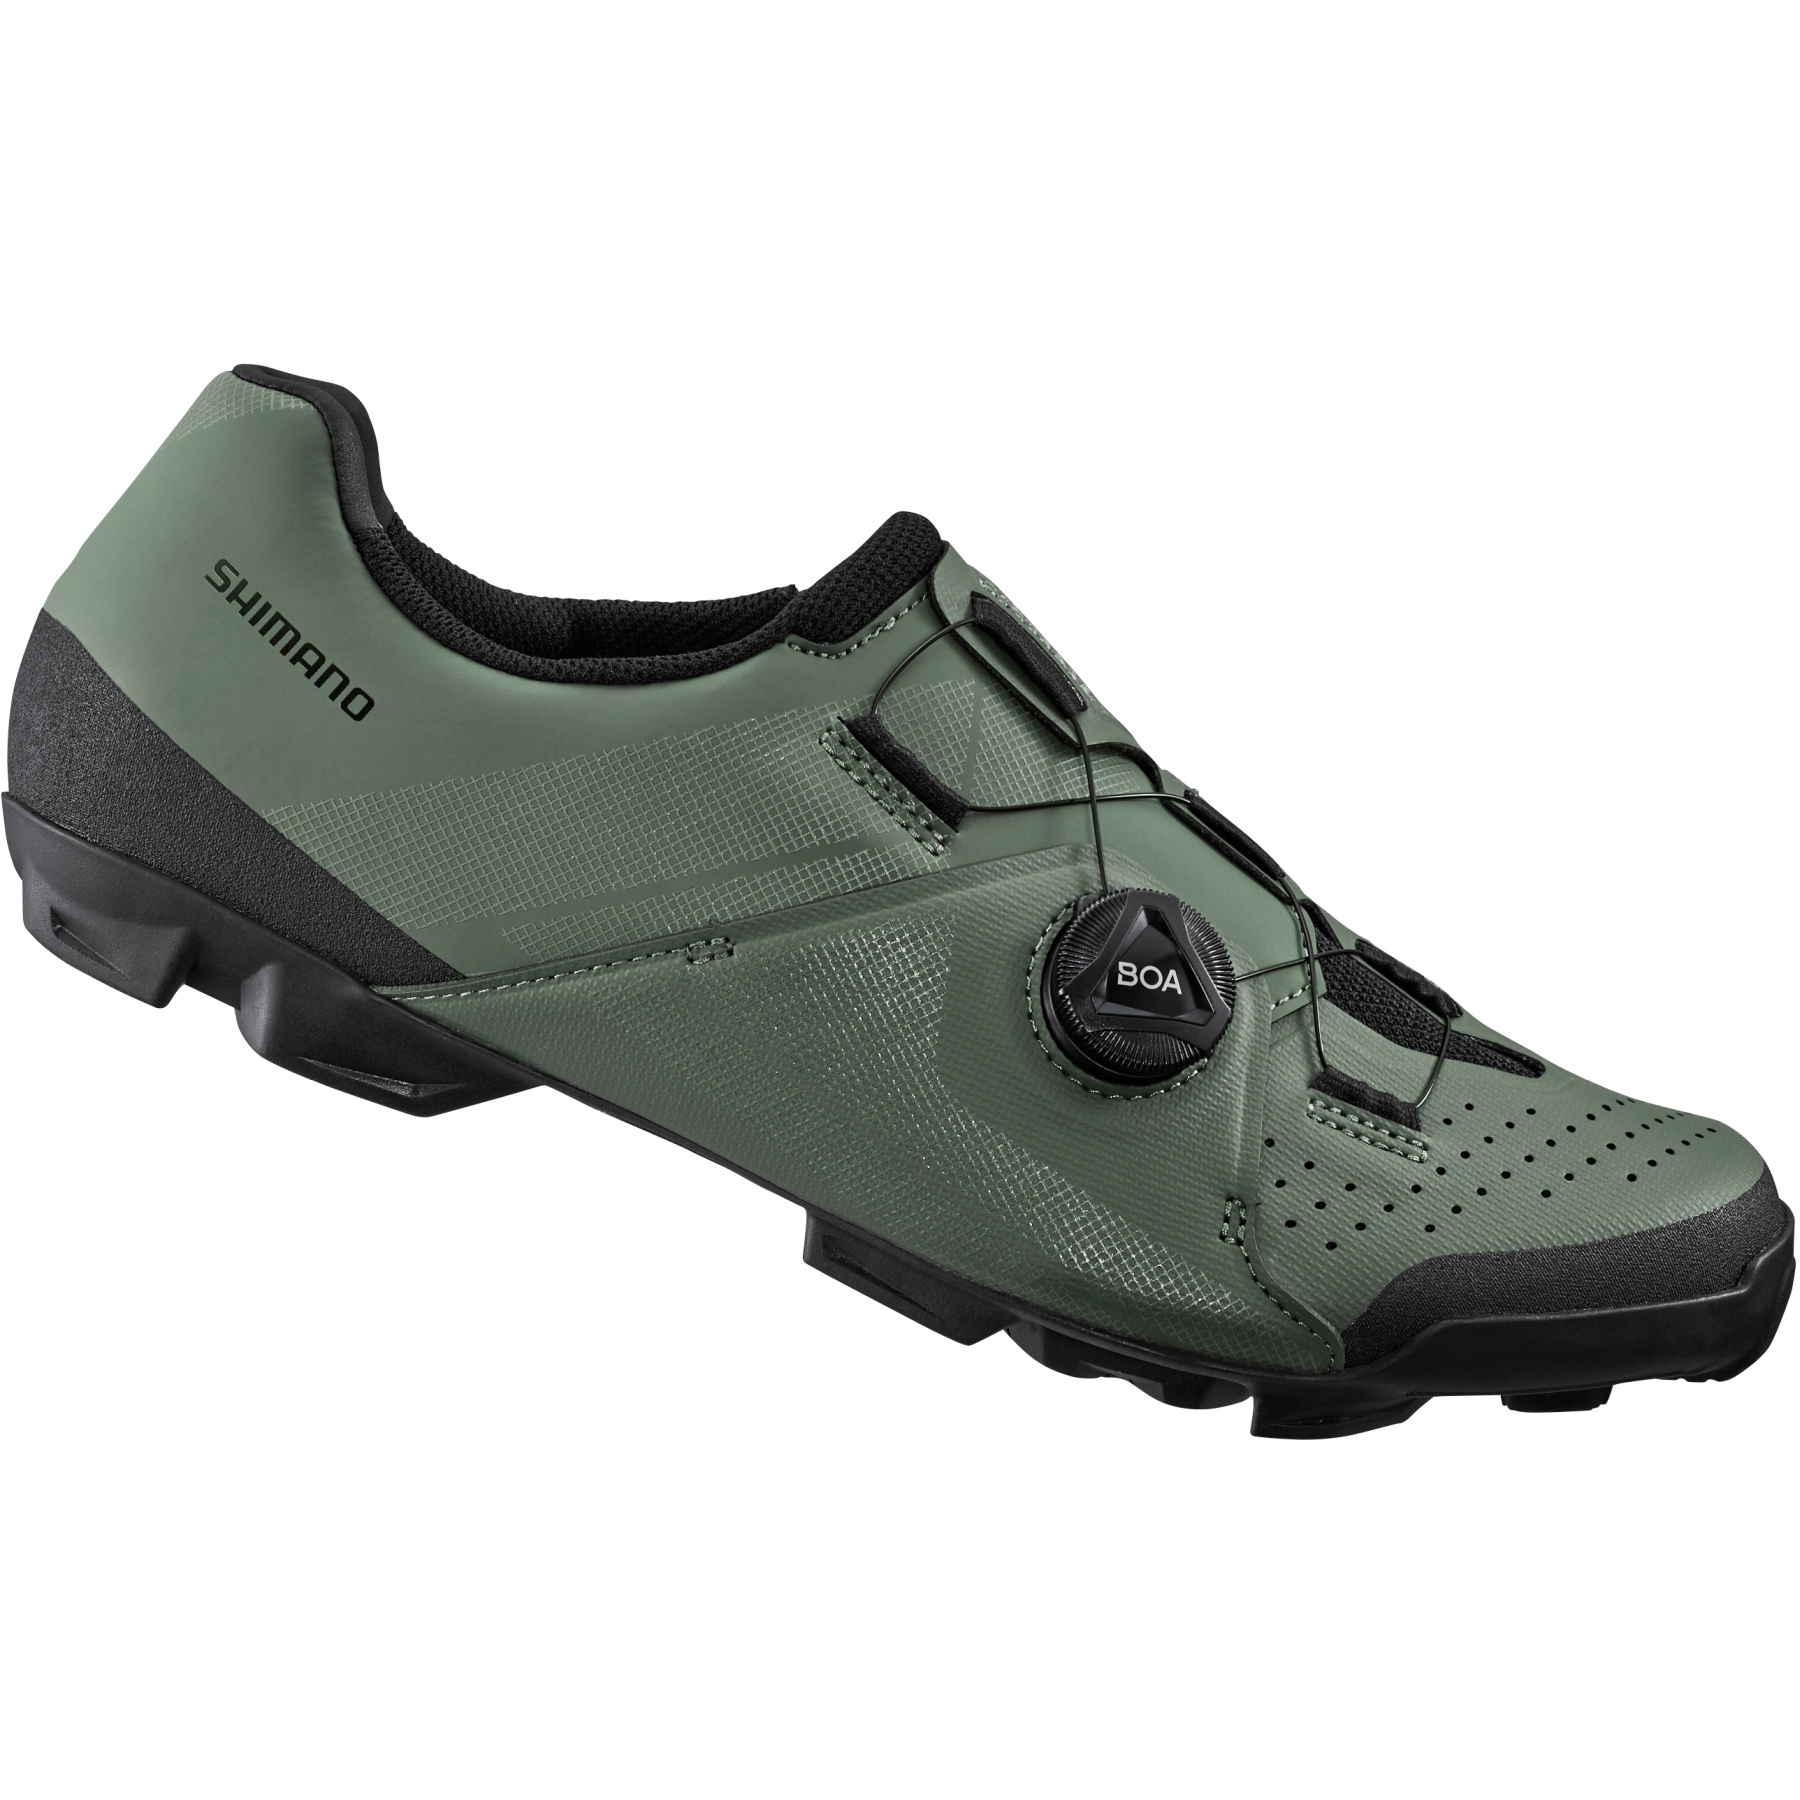 Image of Shimano SH-XC300 Wide MTB Shoes - olive